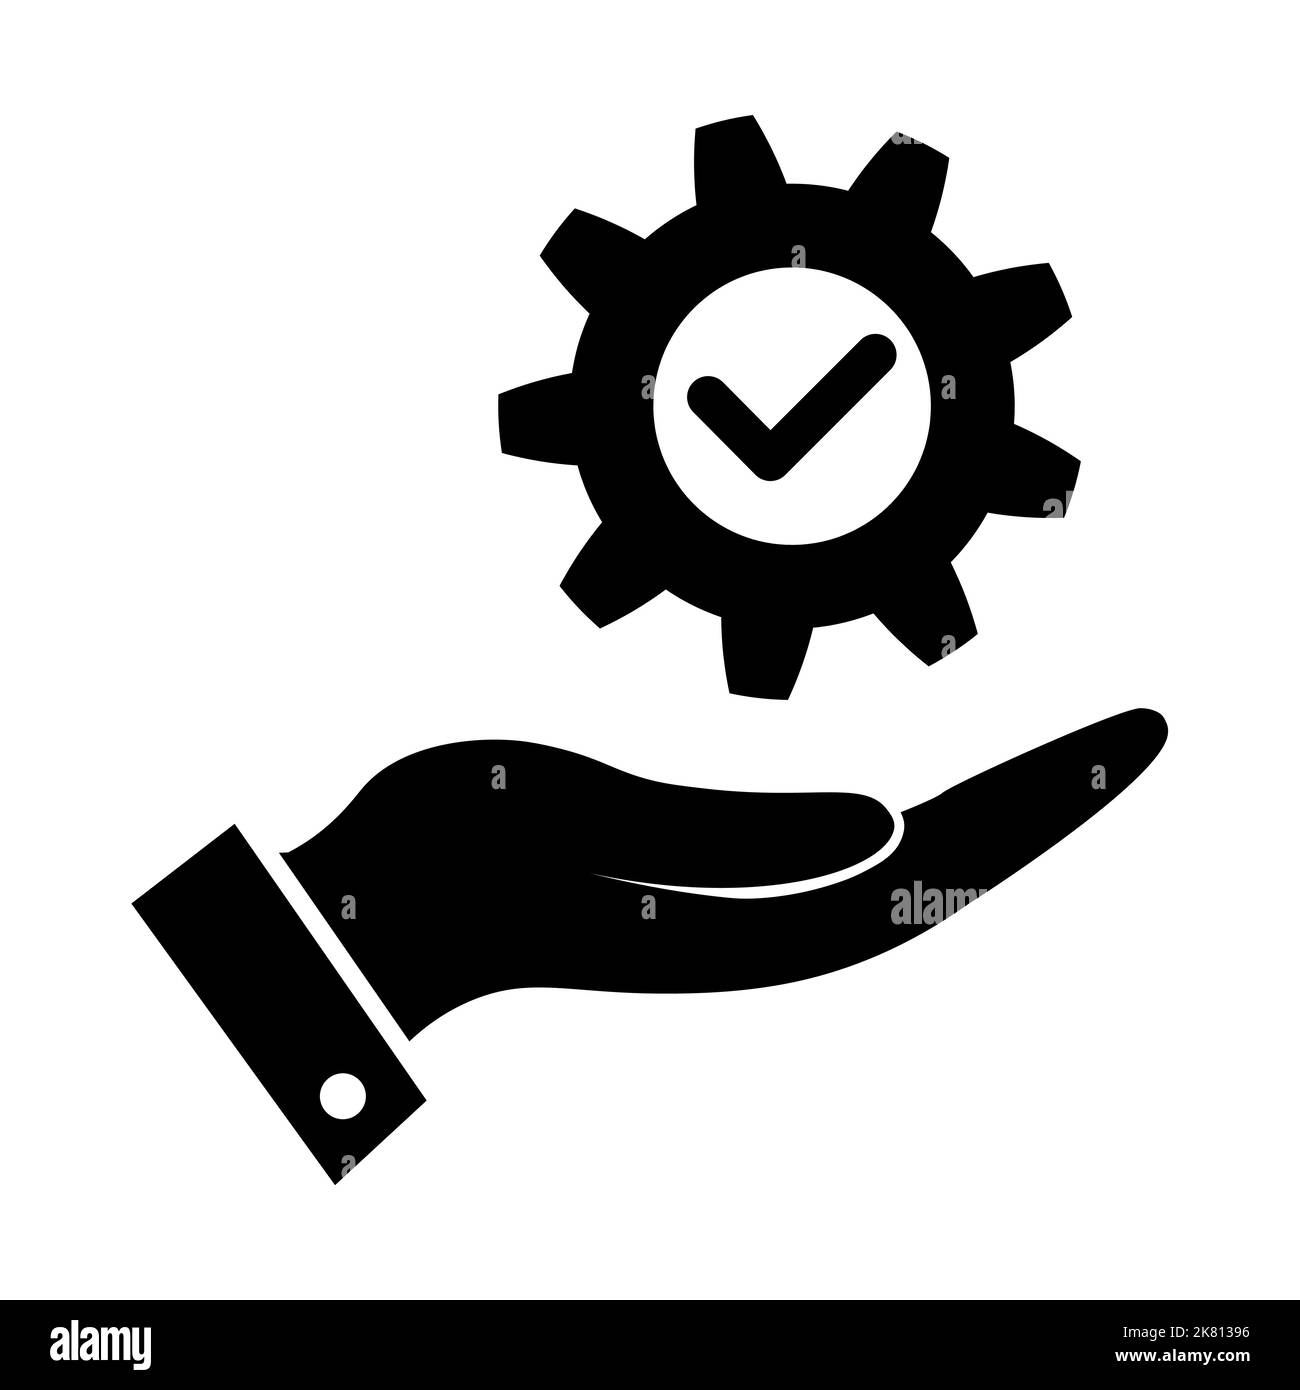 Cogwheel with check mark on hand. Successful process symbol on white. Success sign with cog on hand. Execution, progress, development icon in black Ve Stock Vector